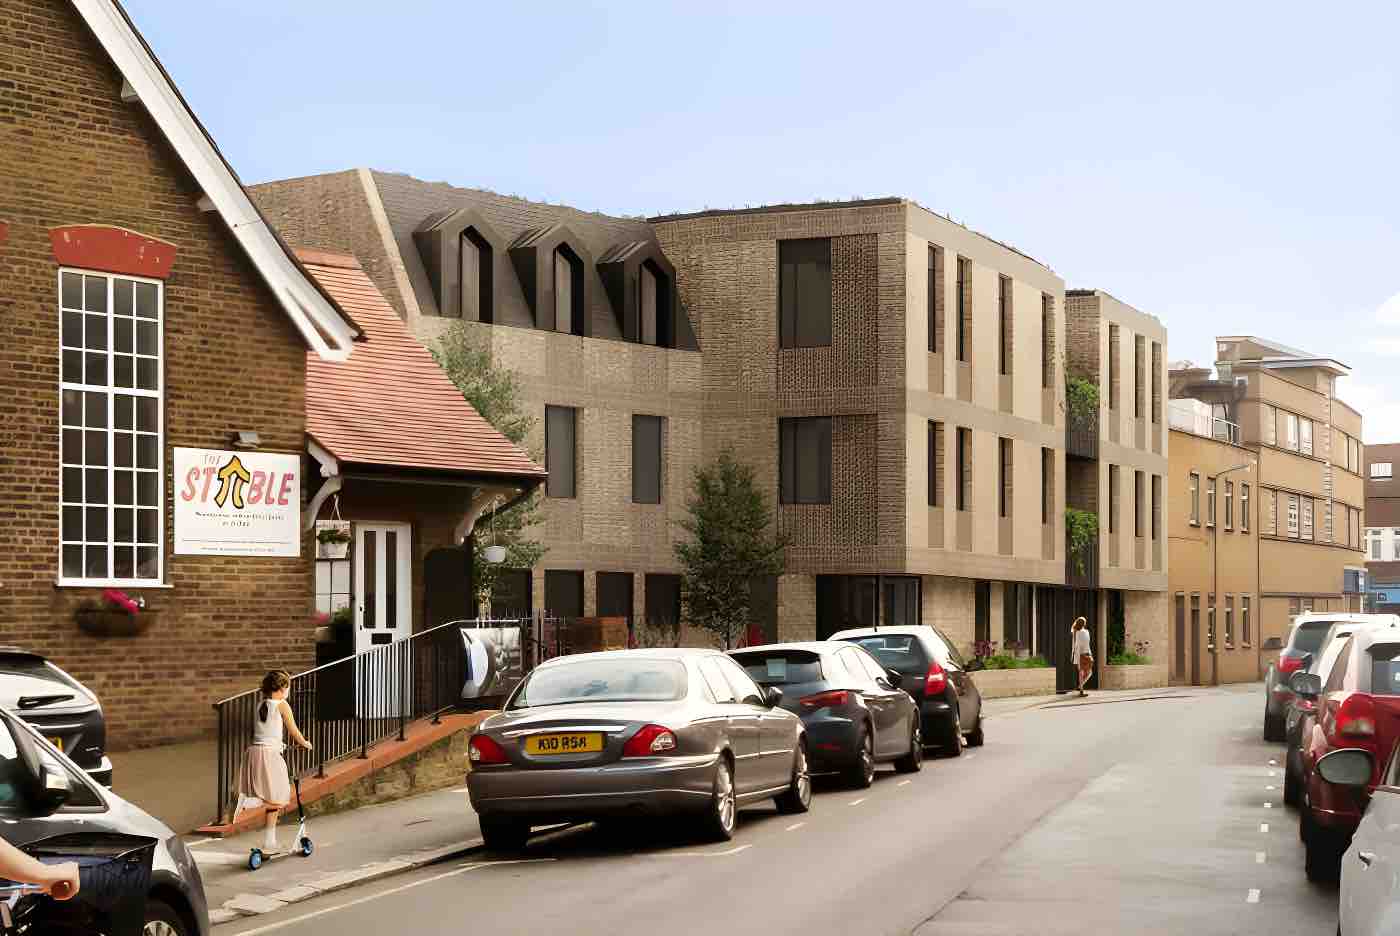 Brand-new Apartments & D1 Space for Barnet